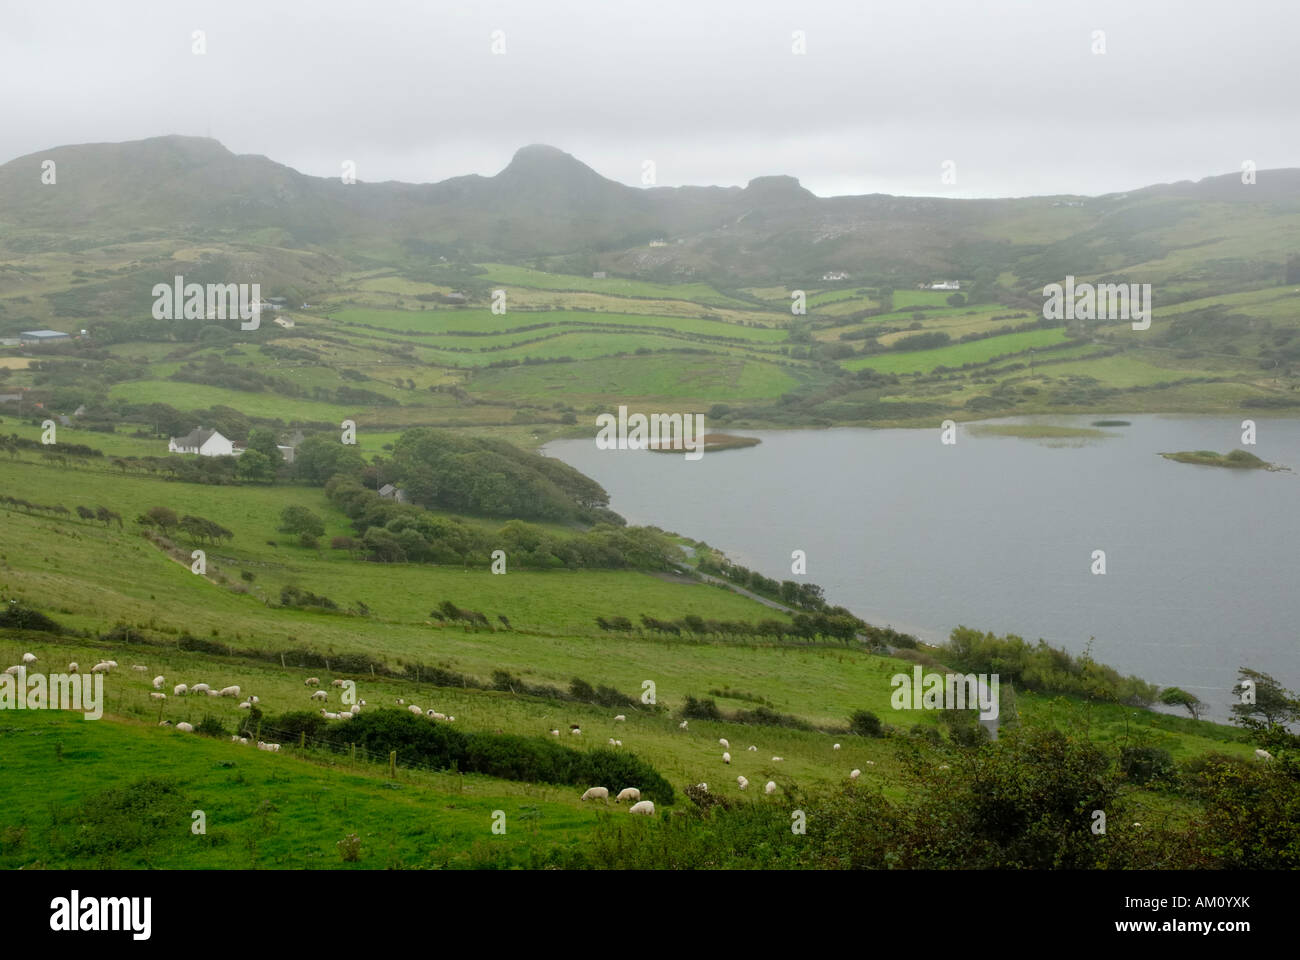 Rain shower sweeping over landscape at Fanad Head, Co Donegal Ireland Stock Photo